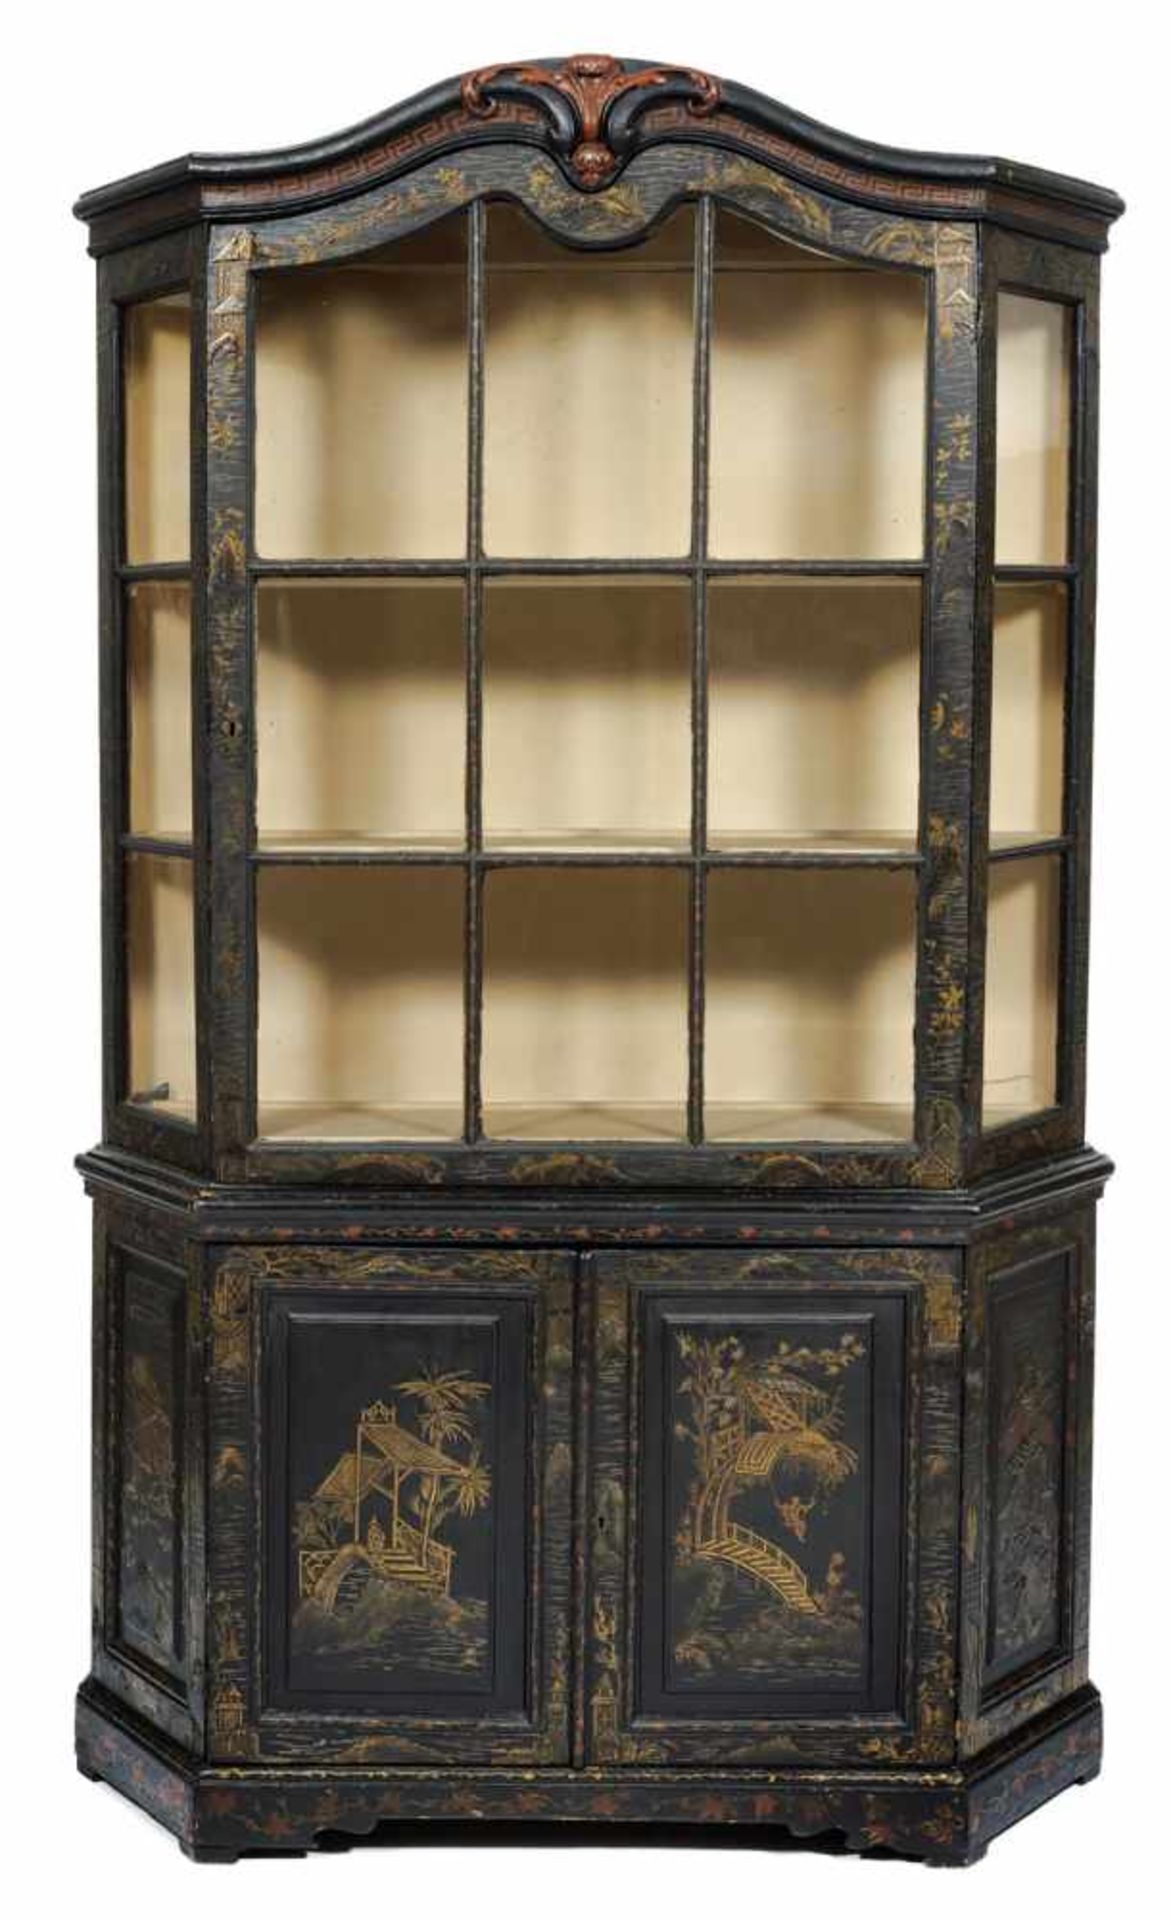 A polychrome lacquered display cabinet of chinoise style, 19th ct. Rest. Add. Signs of aging.